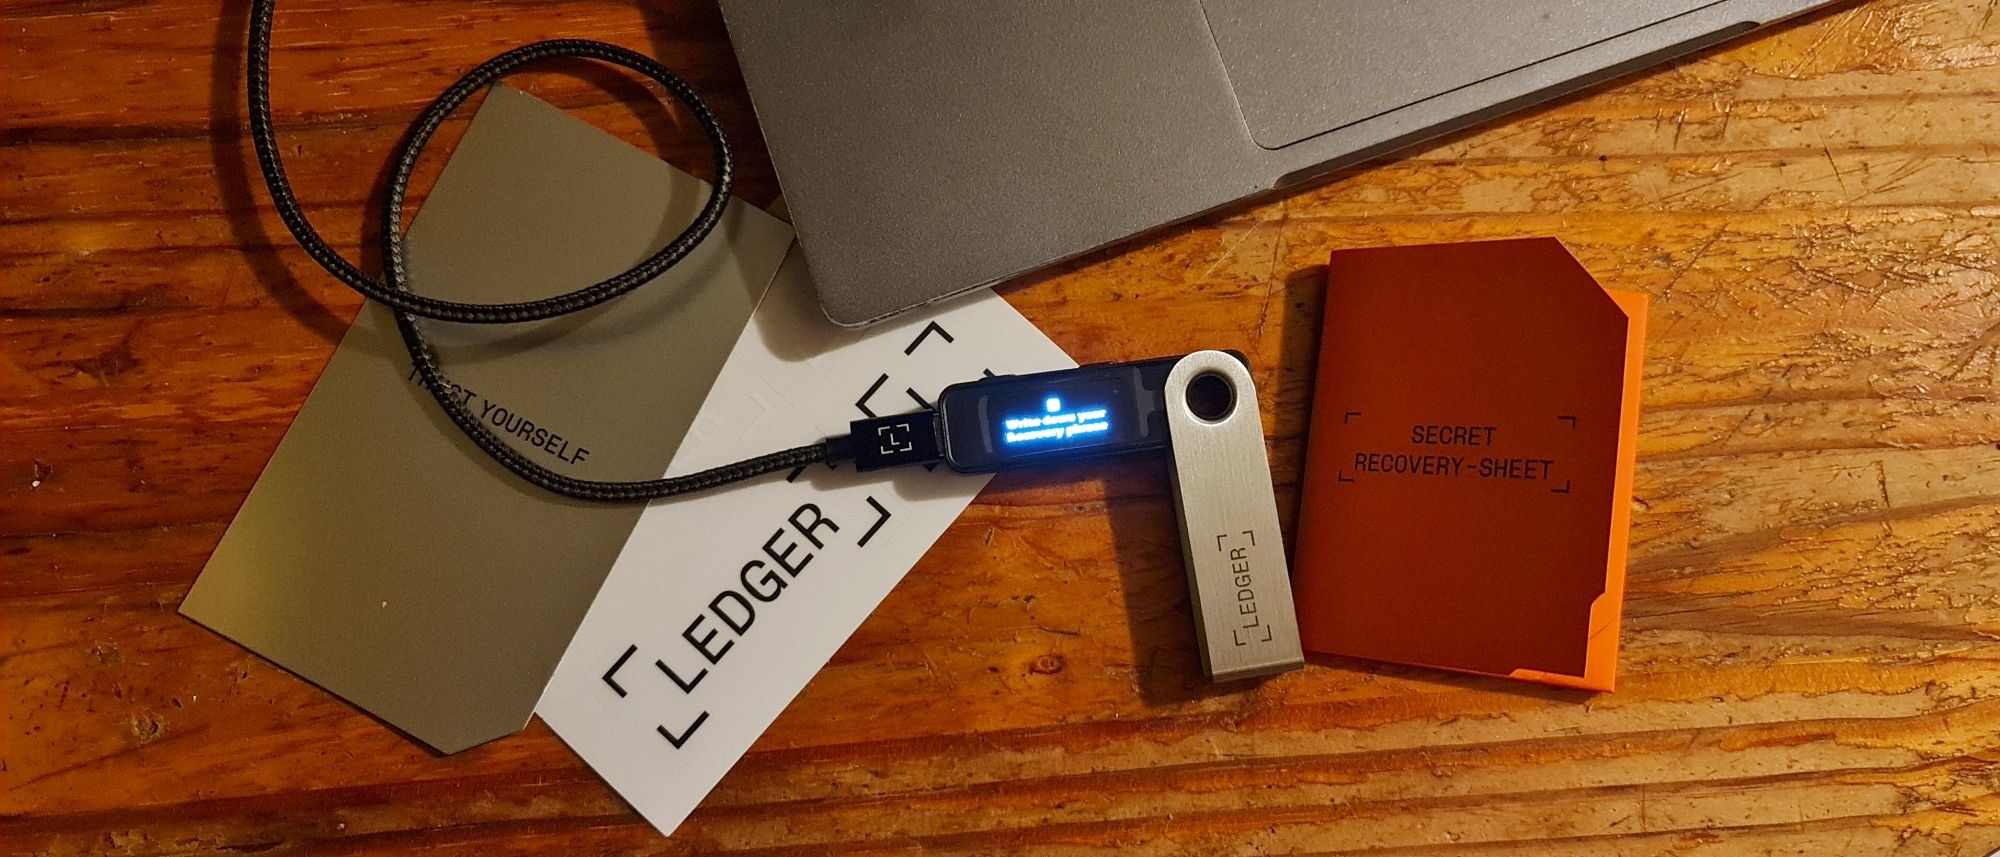 How To Setup And Use Your Ledger Nano S With Ledger Live – The